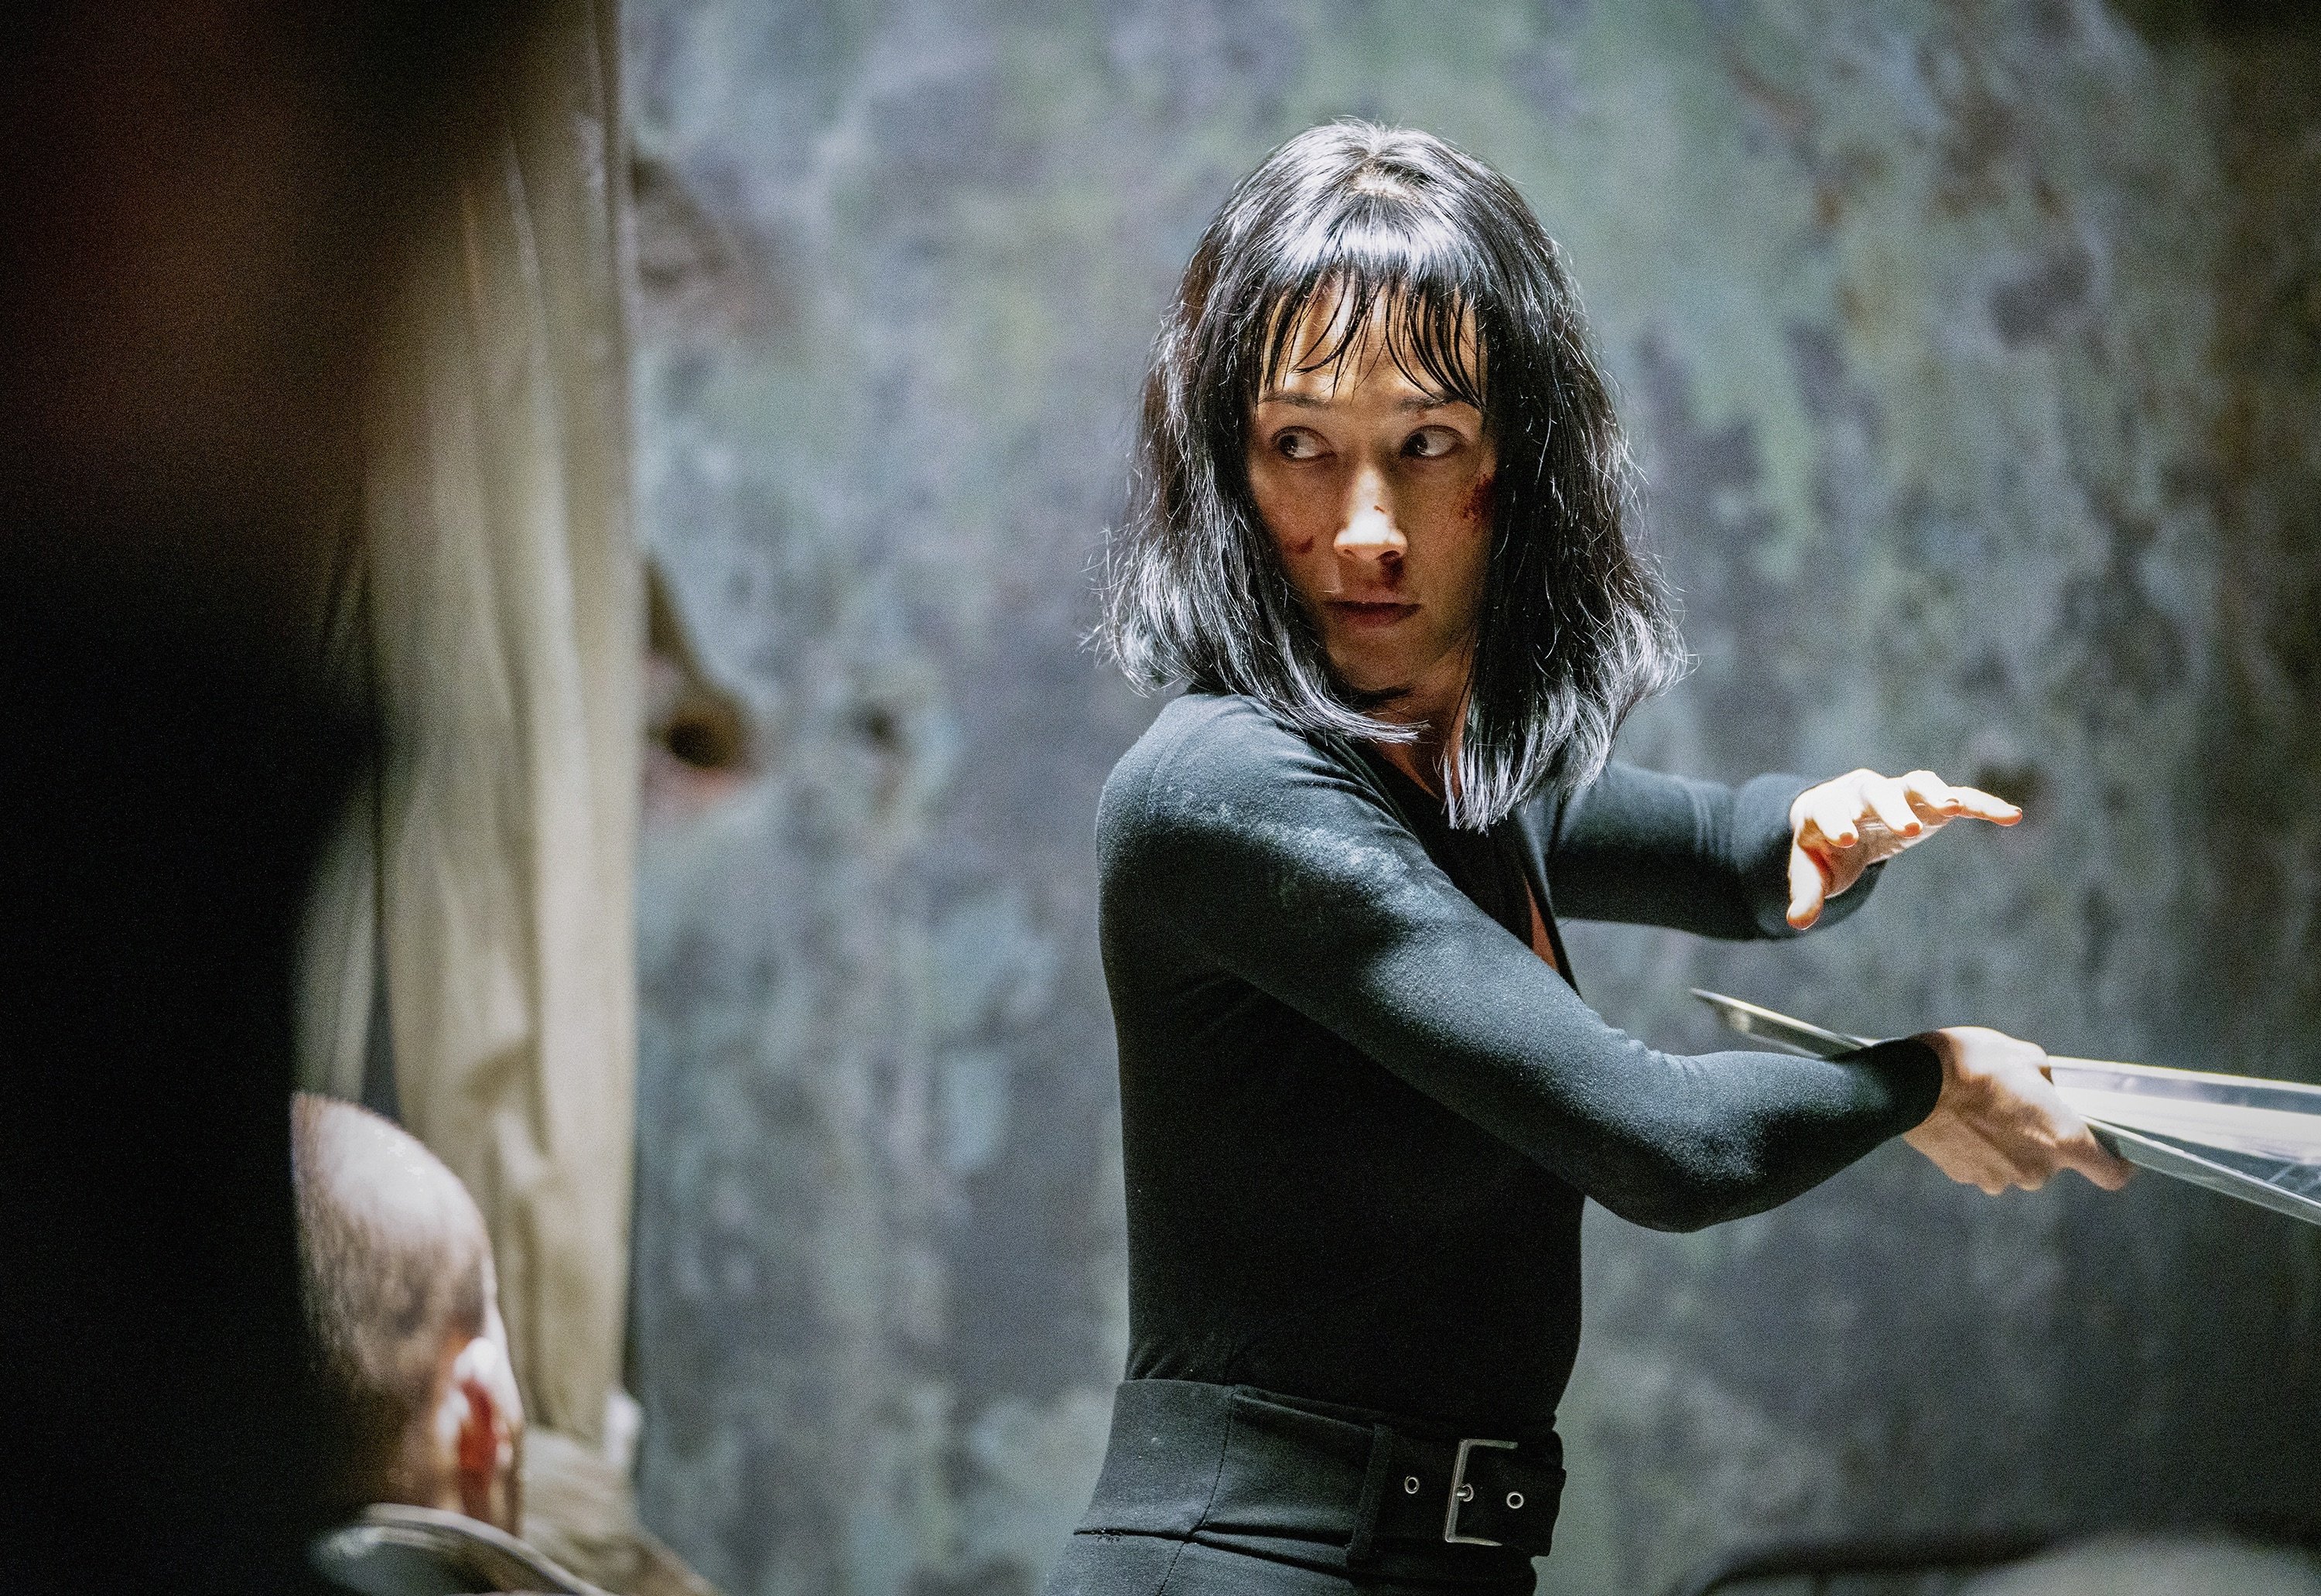 Maggie Q, in a scene from the film “The Protege.” (Lionsgate via AP)